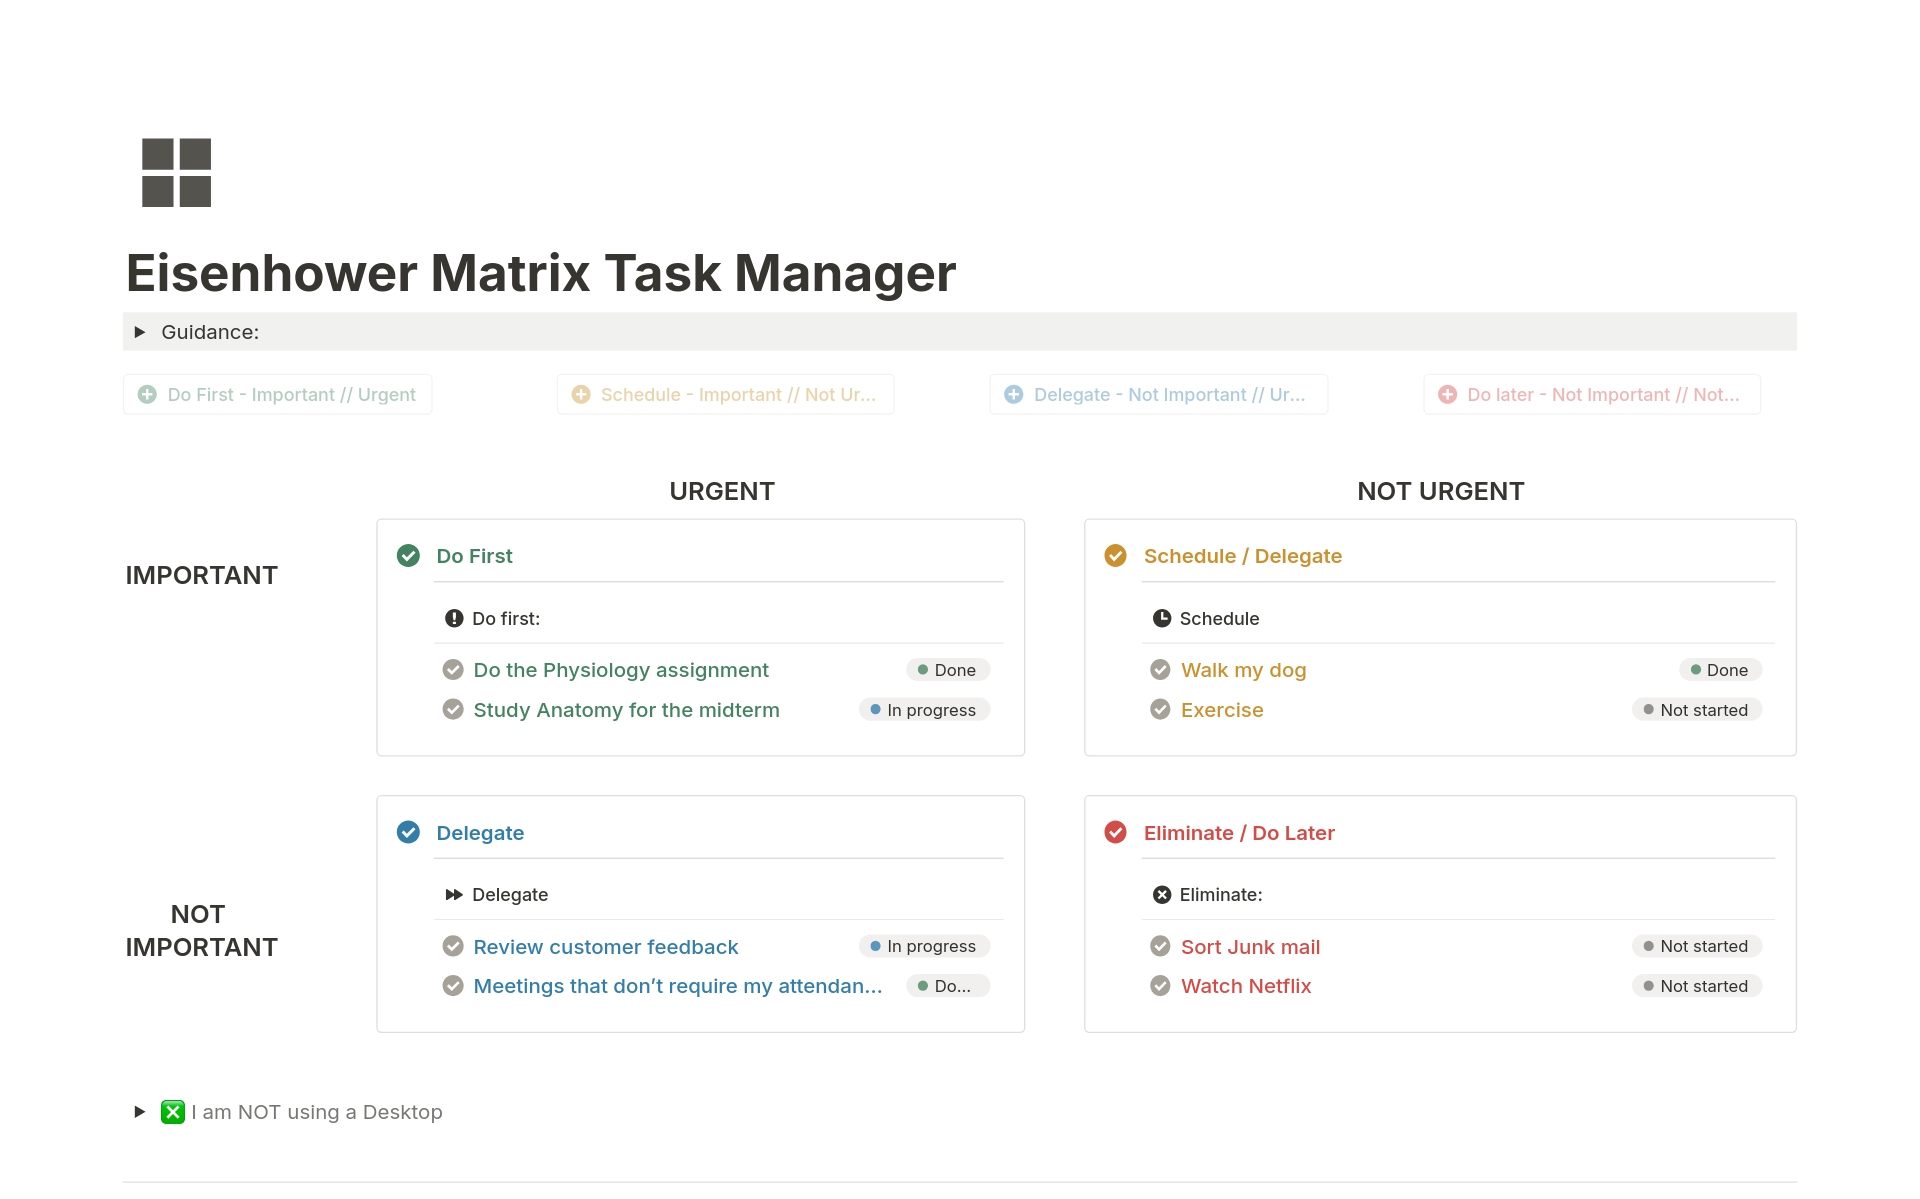 Revolutionize your productivity with the Eisenhower Matrix Task Manager, that simplifies task prioritization and organization for unparalleled efficiency. Inspired by the 34th president of the United States.